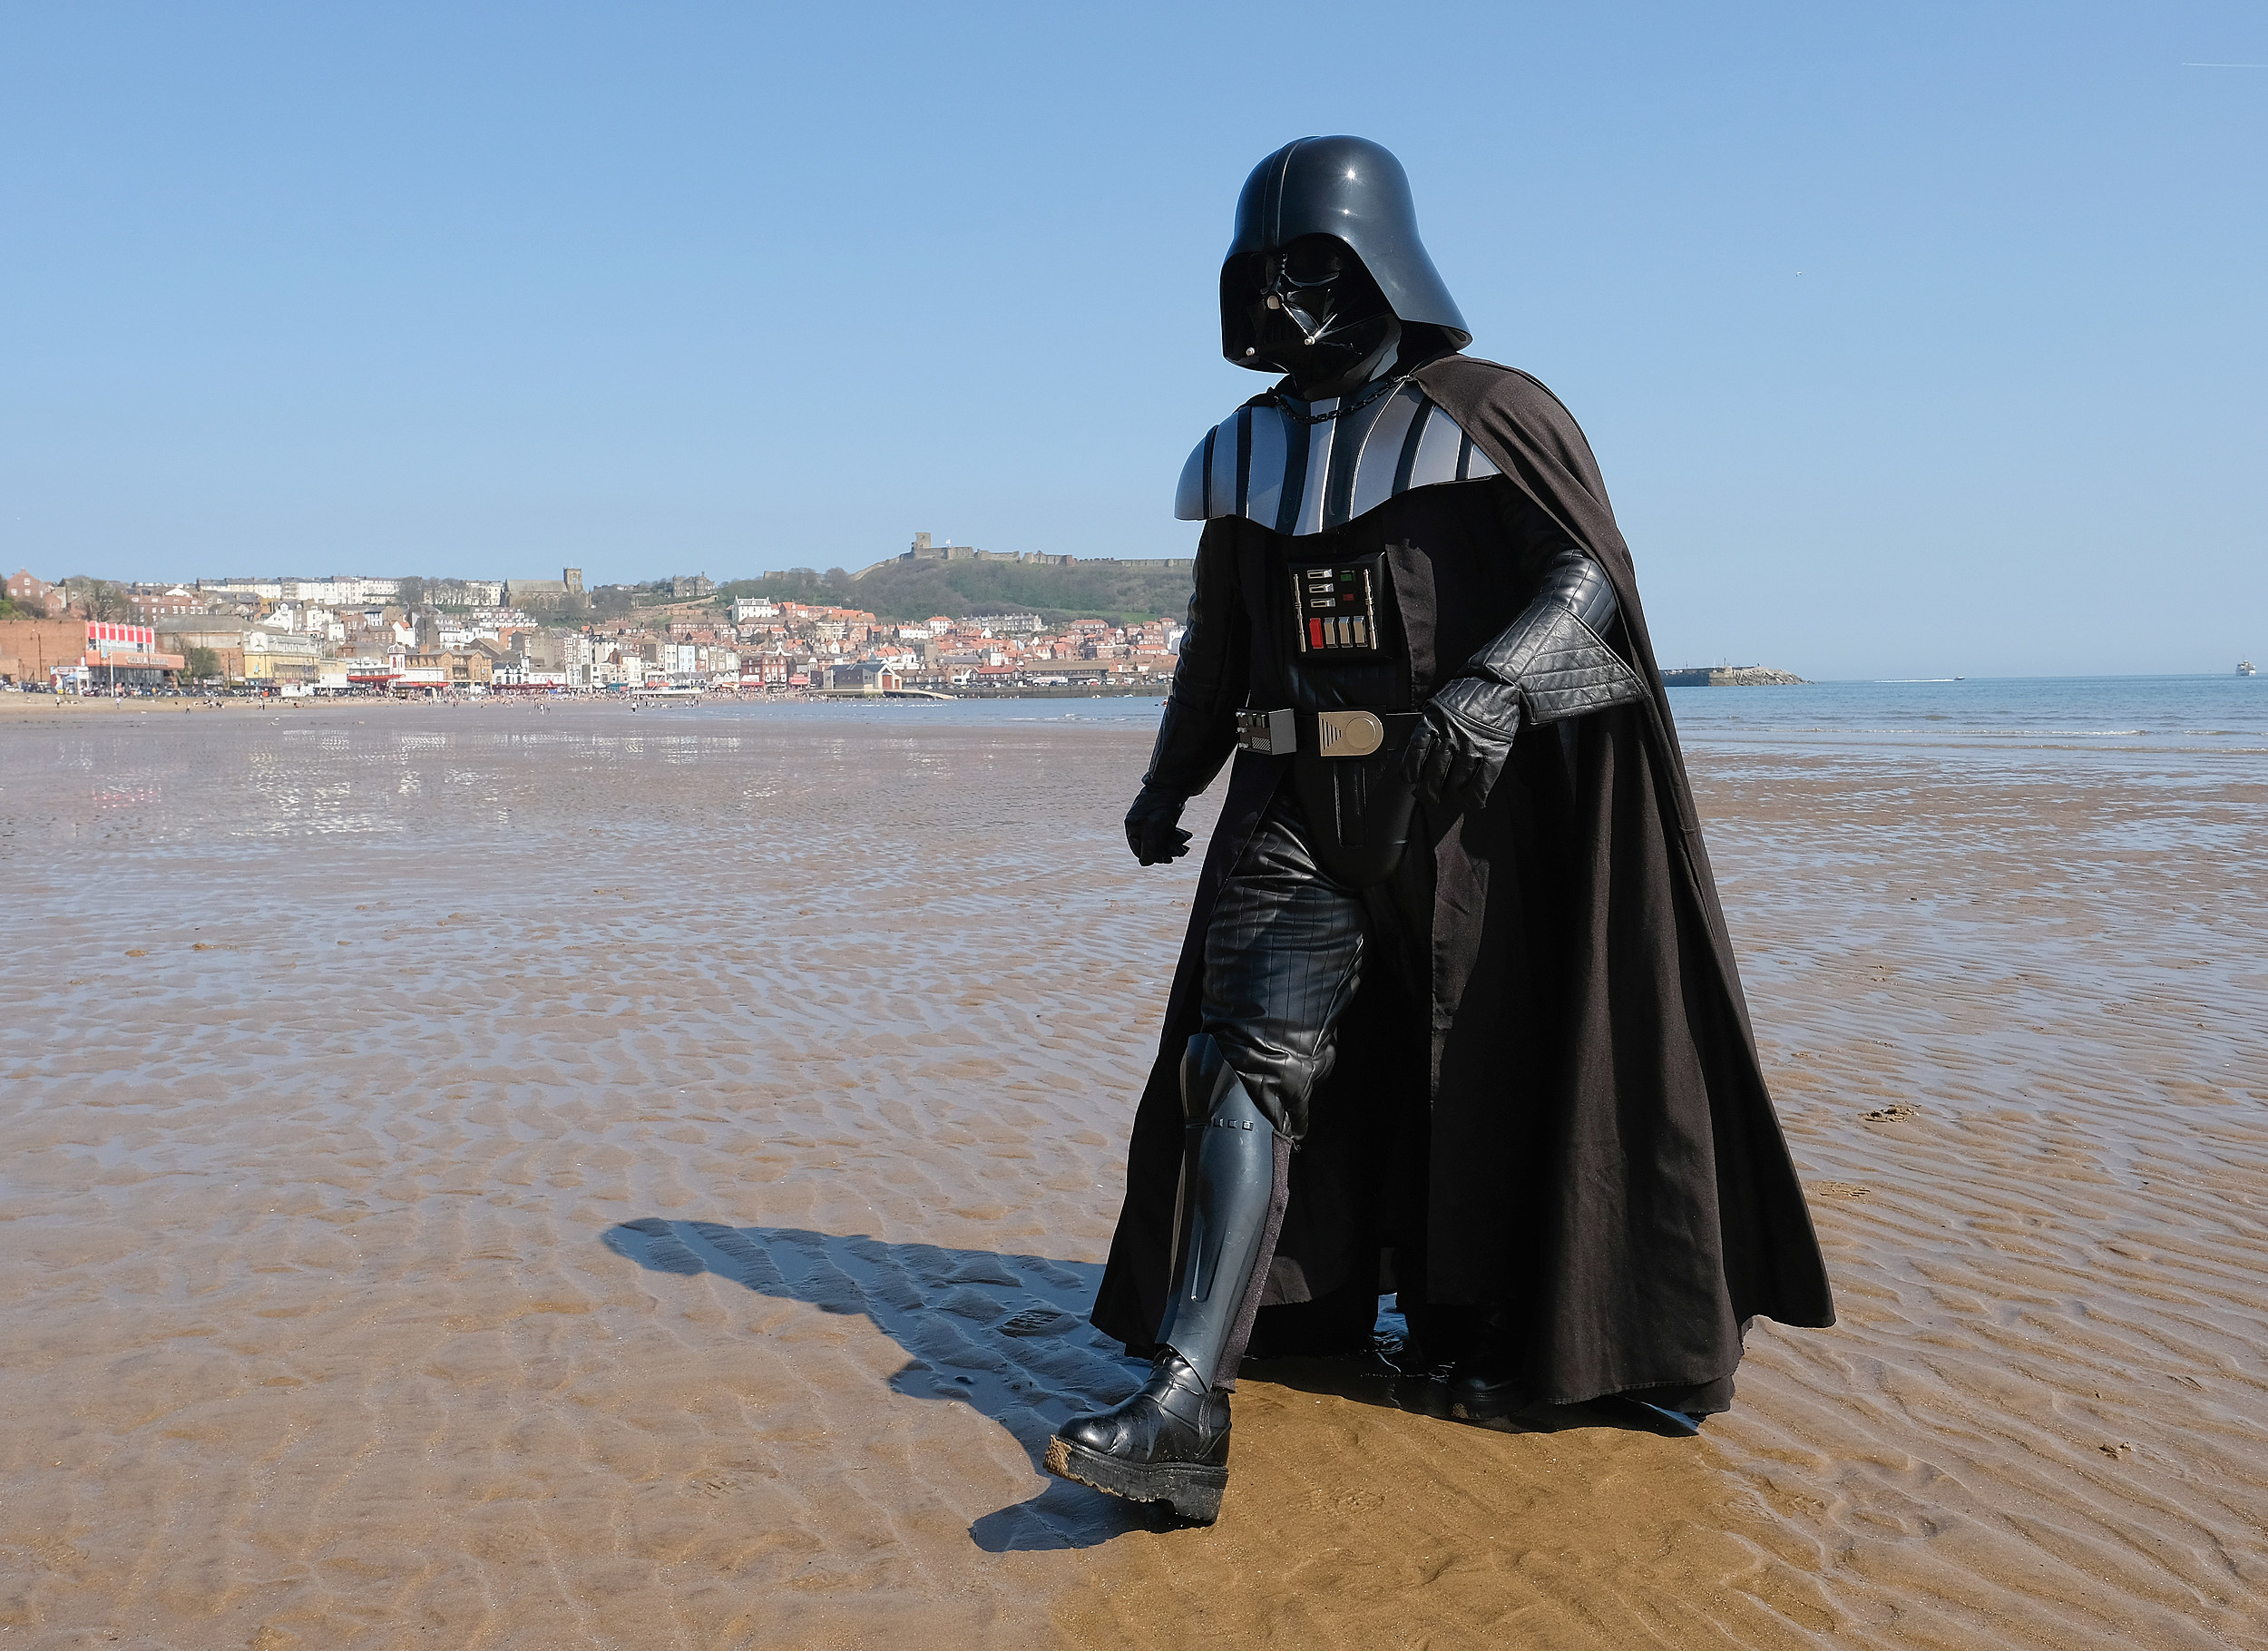 A Song about Darth Vader on Star Wars Day [VIDEO]